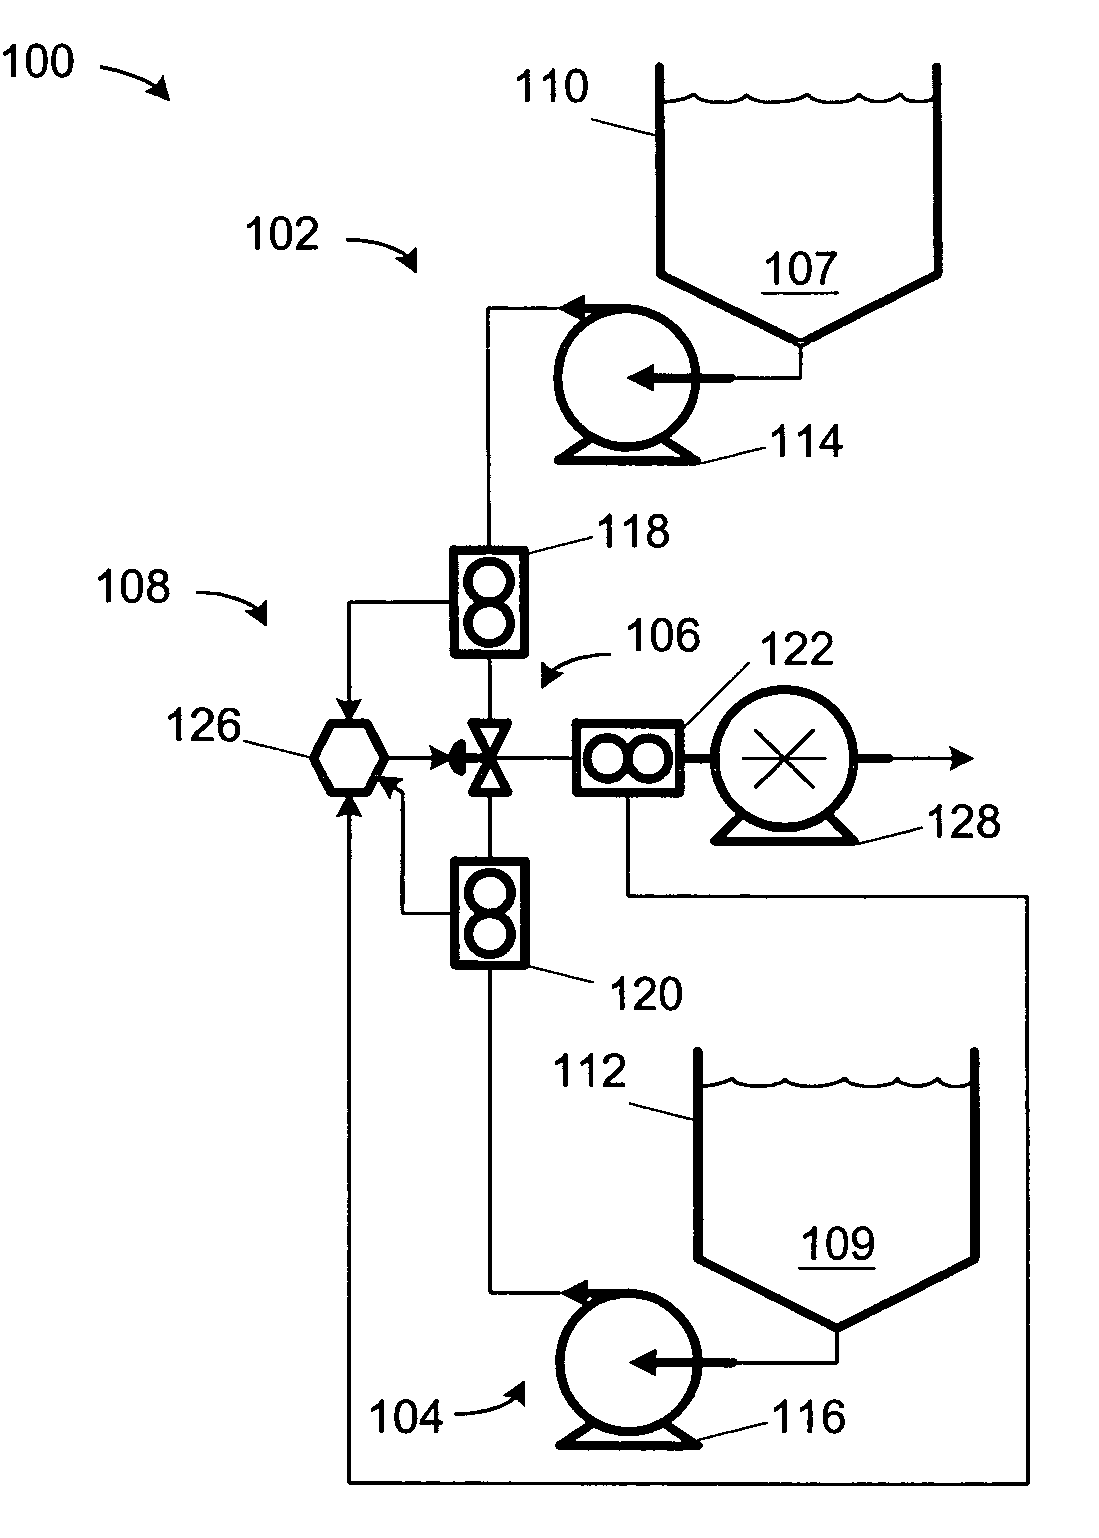 Closed automatic fluid mixing system